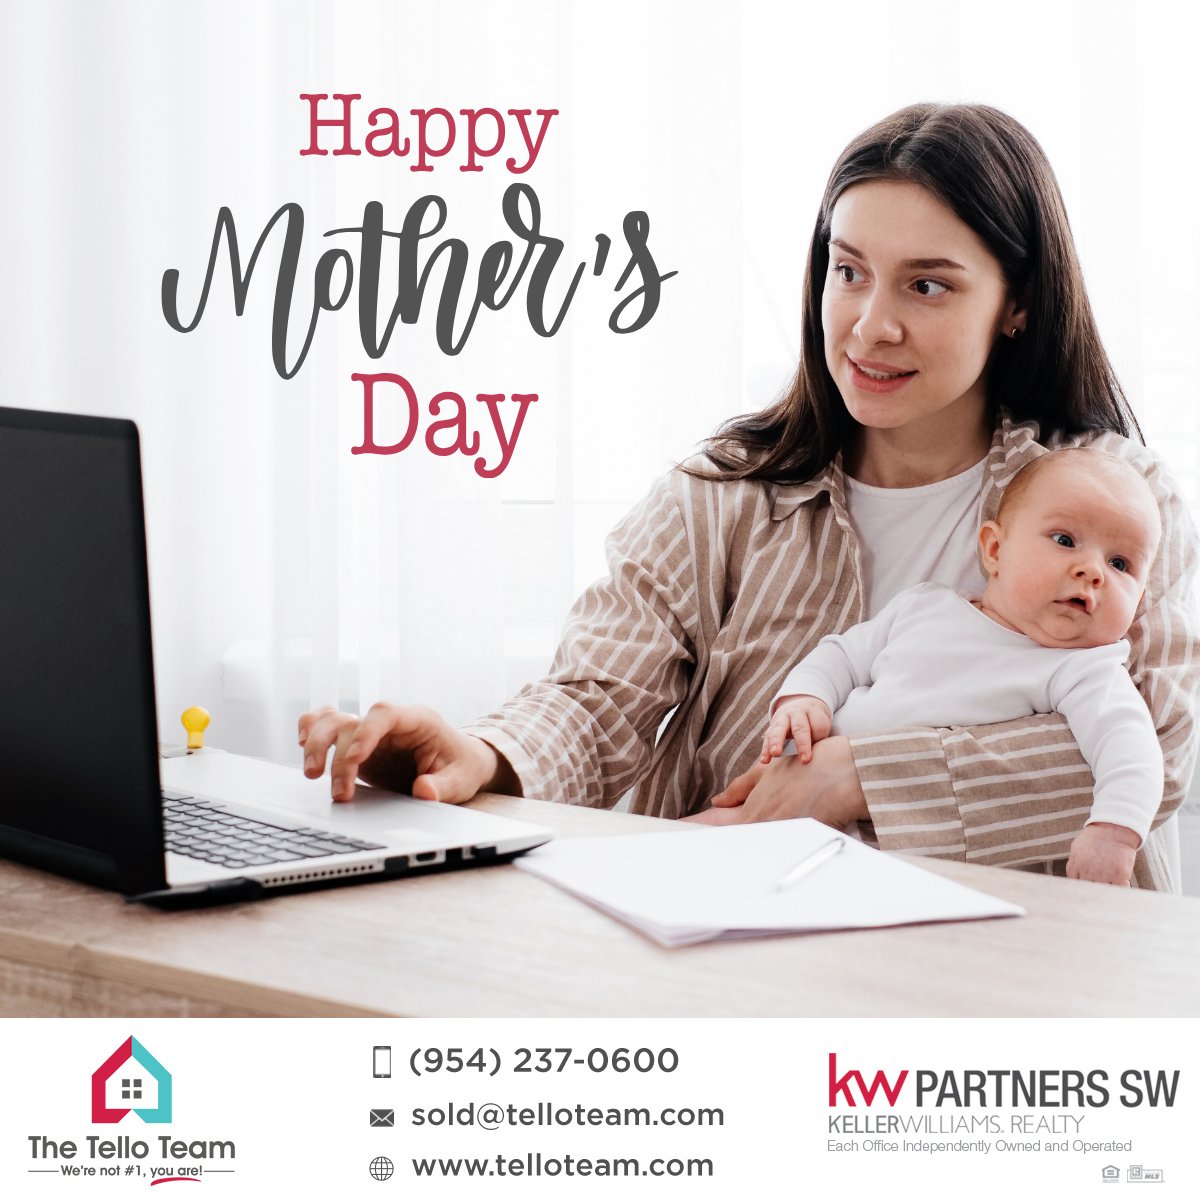 Mothers are like buttons, they hold everything together! Happy Mother's Day!

Looking to buy/sell a house? Contact a realtor you can trust 📲+1 954-237-0600

#realestatebroker #realestatemiami #realestateflorida #floridarealtor #floridarealtors #floridarealestate